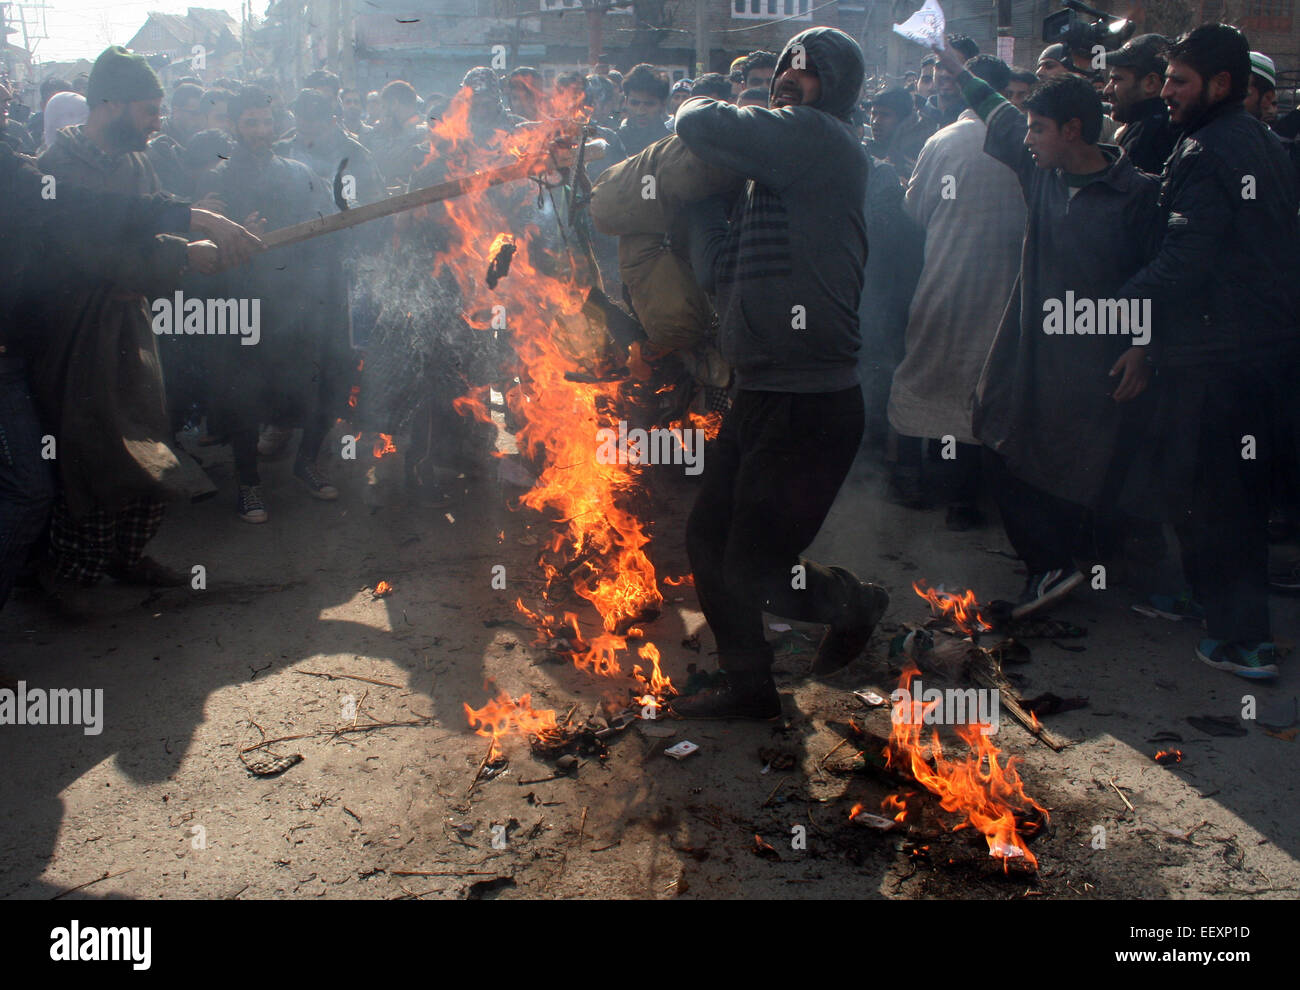 Srinagar, Indian Administered Kashmir:23January Kashmiri muslims burn the effigy of Publishers Charlie Hebdo during a protest against caricatures published in French magazine Charlie Hebdo, in Srinagar Friday, Businesses and shops have closed in Kashmir in a daylong strike called by separatists and religious parties protesting the publication of a caricature of Prophet Muhammad in the latest issue of French satirical weekly Charlie Hebdo. Credit: Sofi Suhail/Alamy Live News Stock Photo